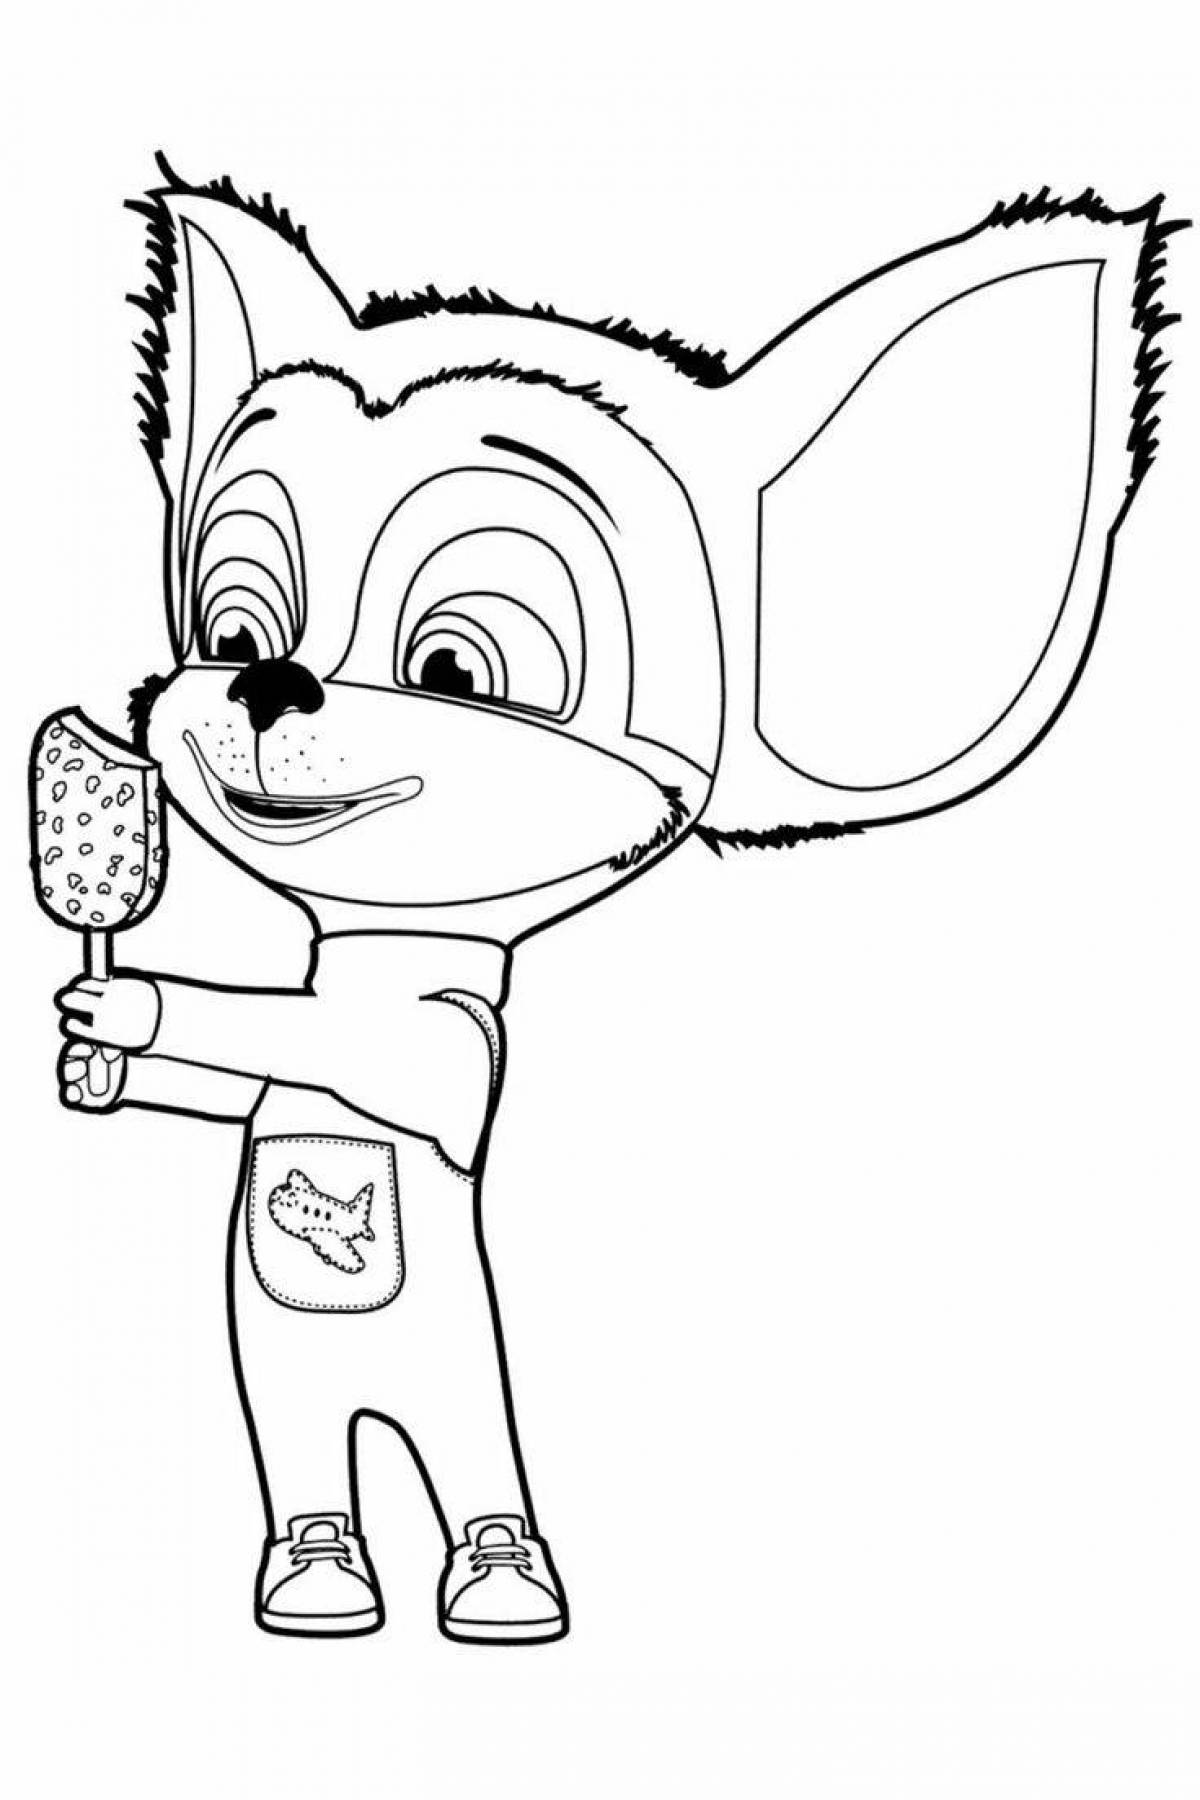 Violent coloring page turn on